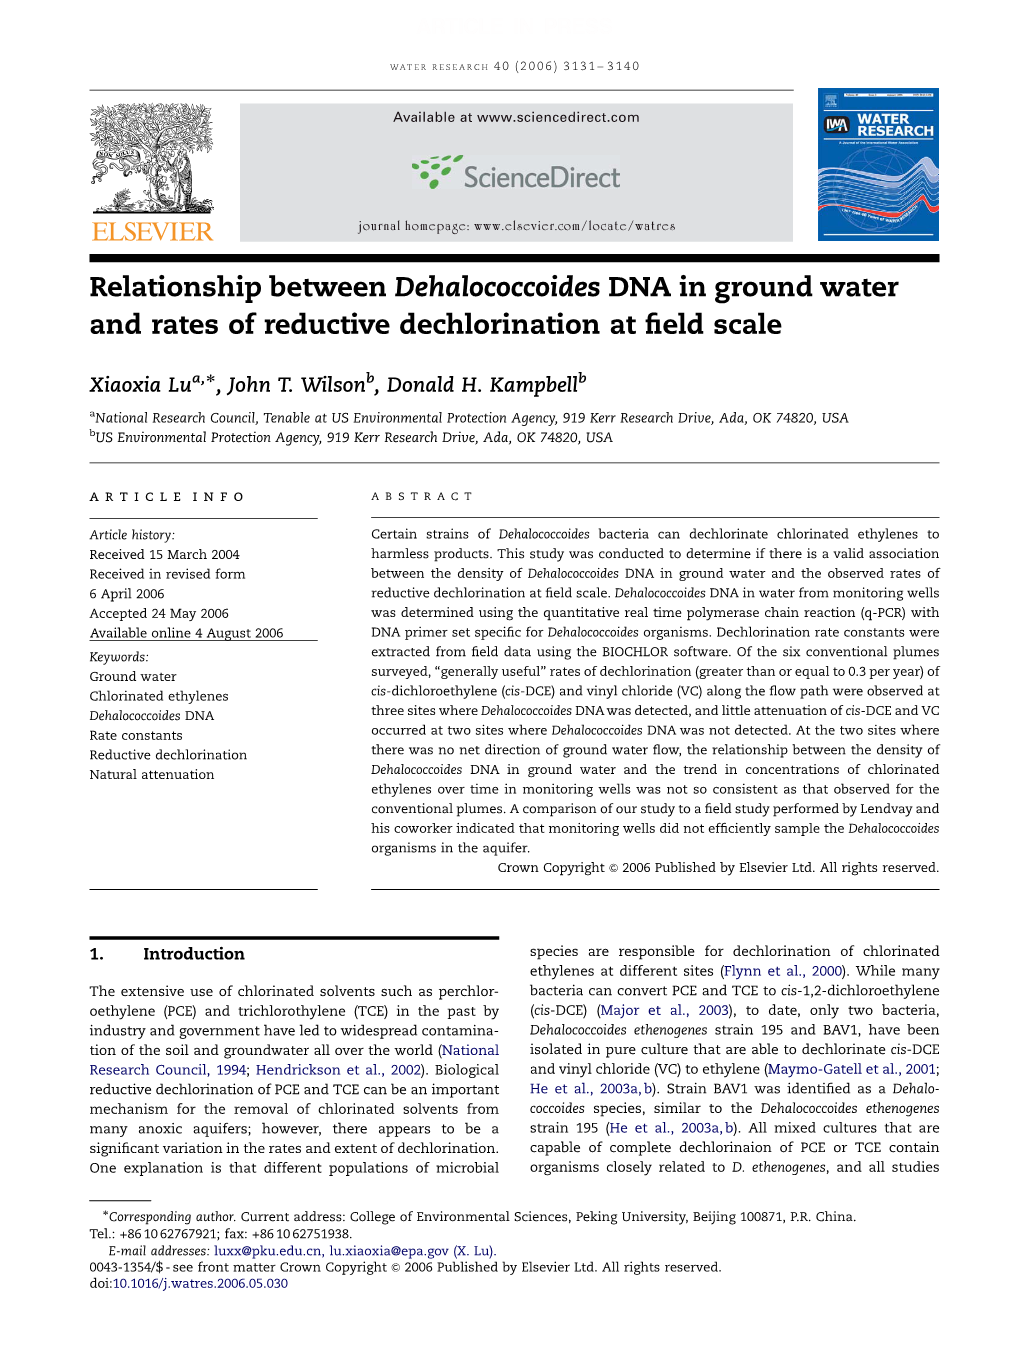 Relationship Between Dehalococcoides DNA in Ground Water and Rates of Reductive Dechlorination at ﬁeld Scale